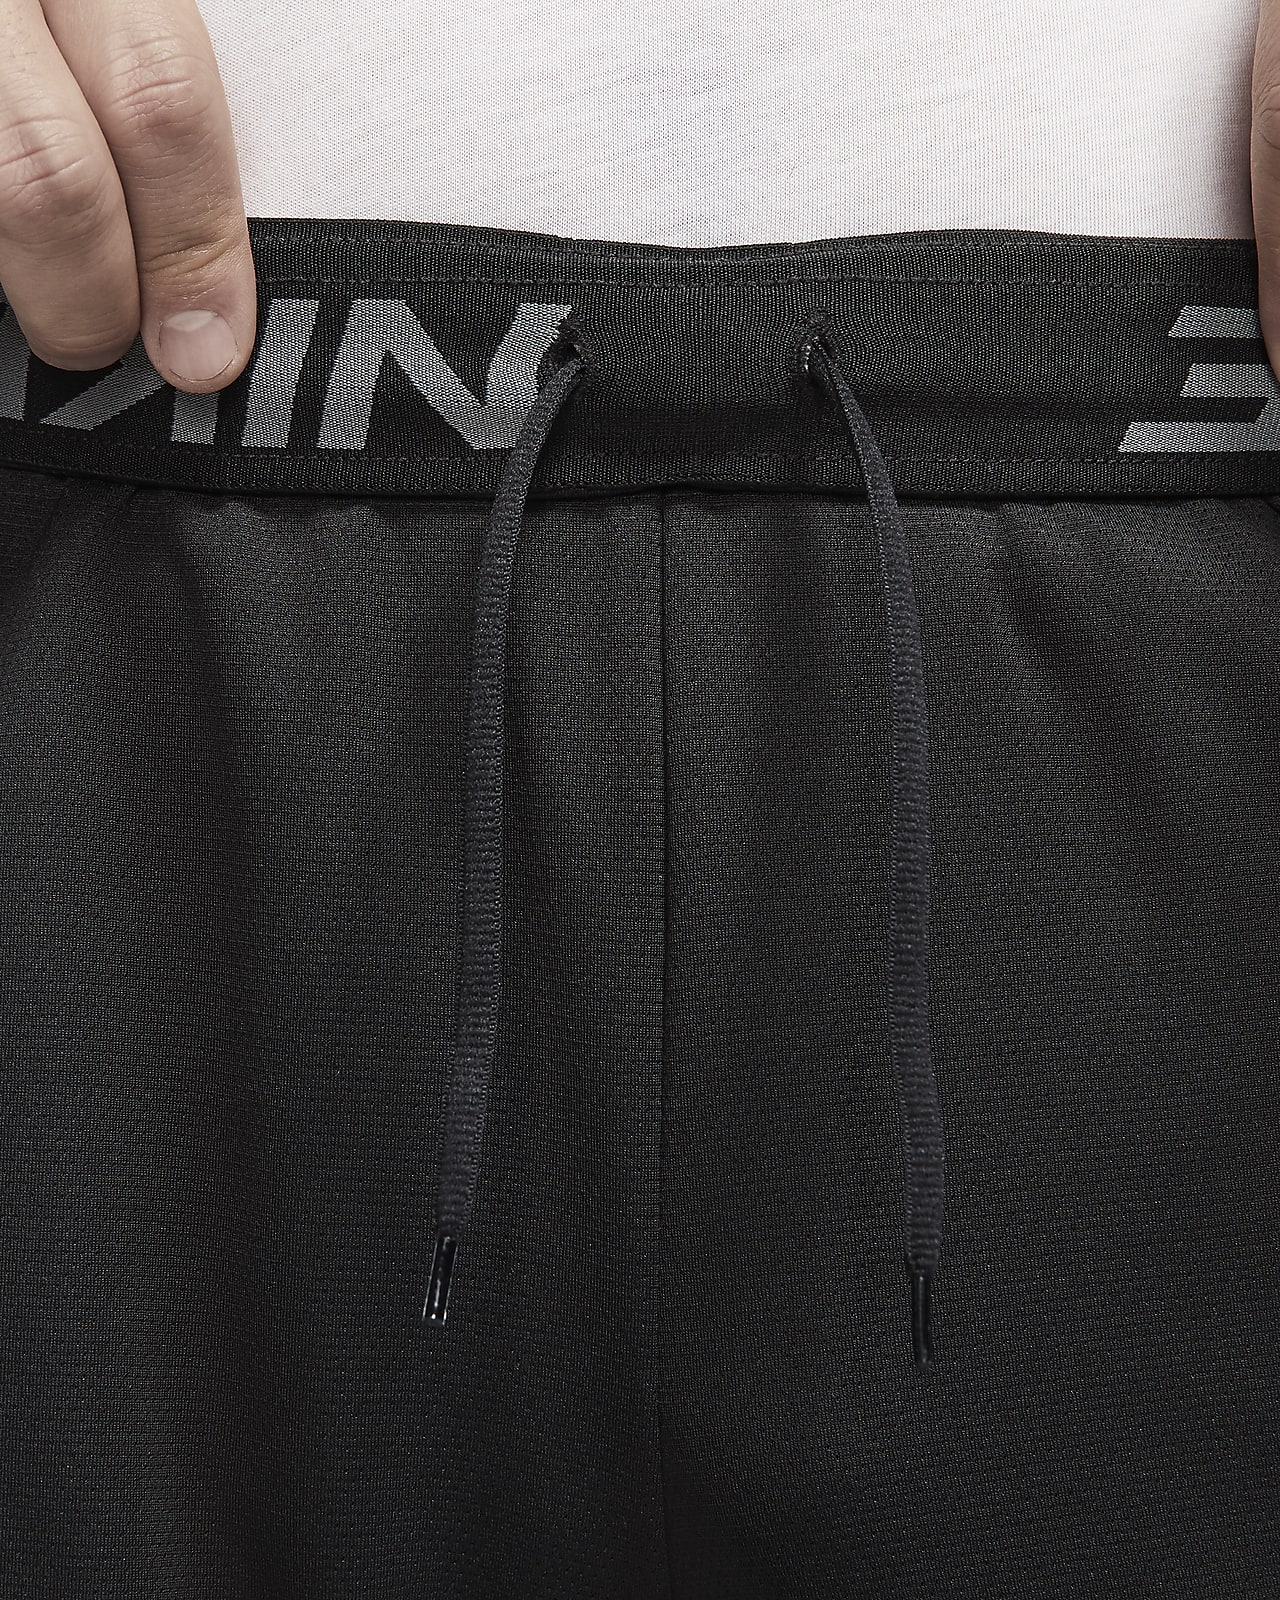 men's nike dri fit shorts with pockets